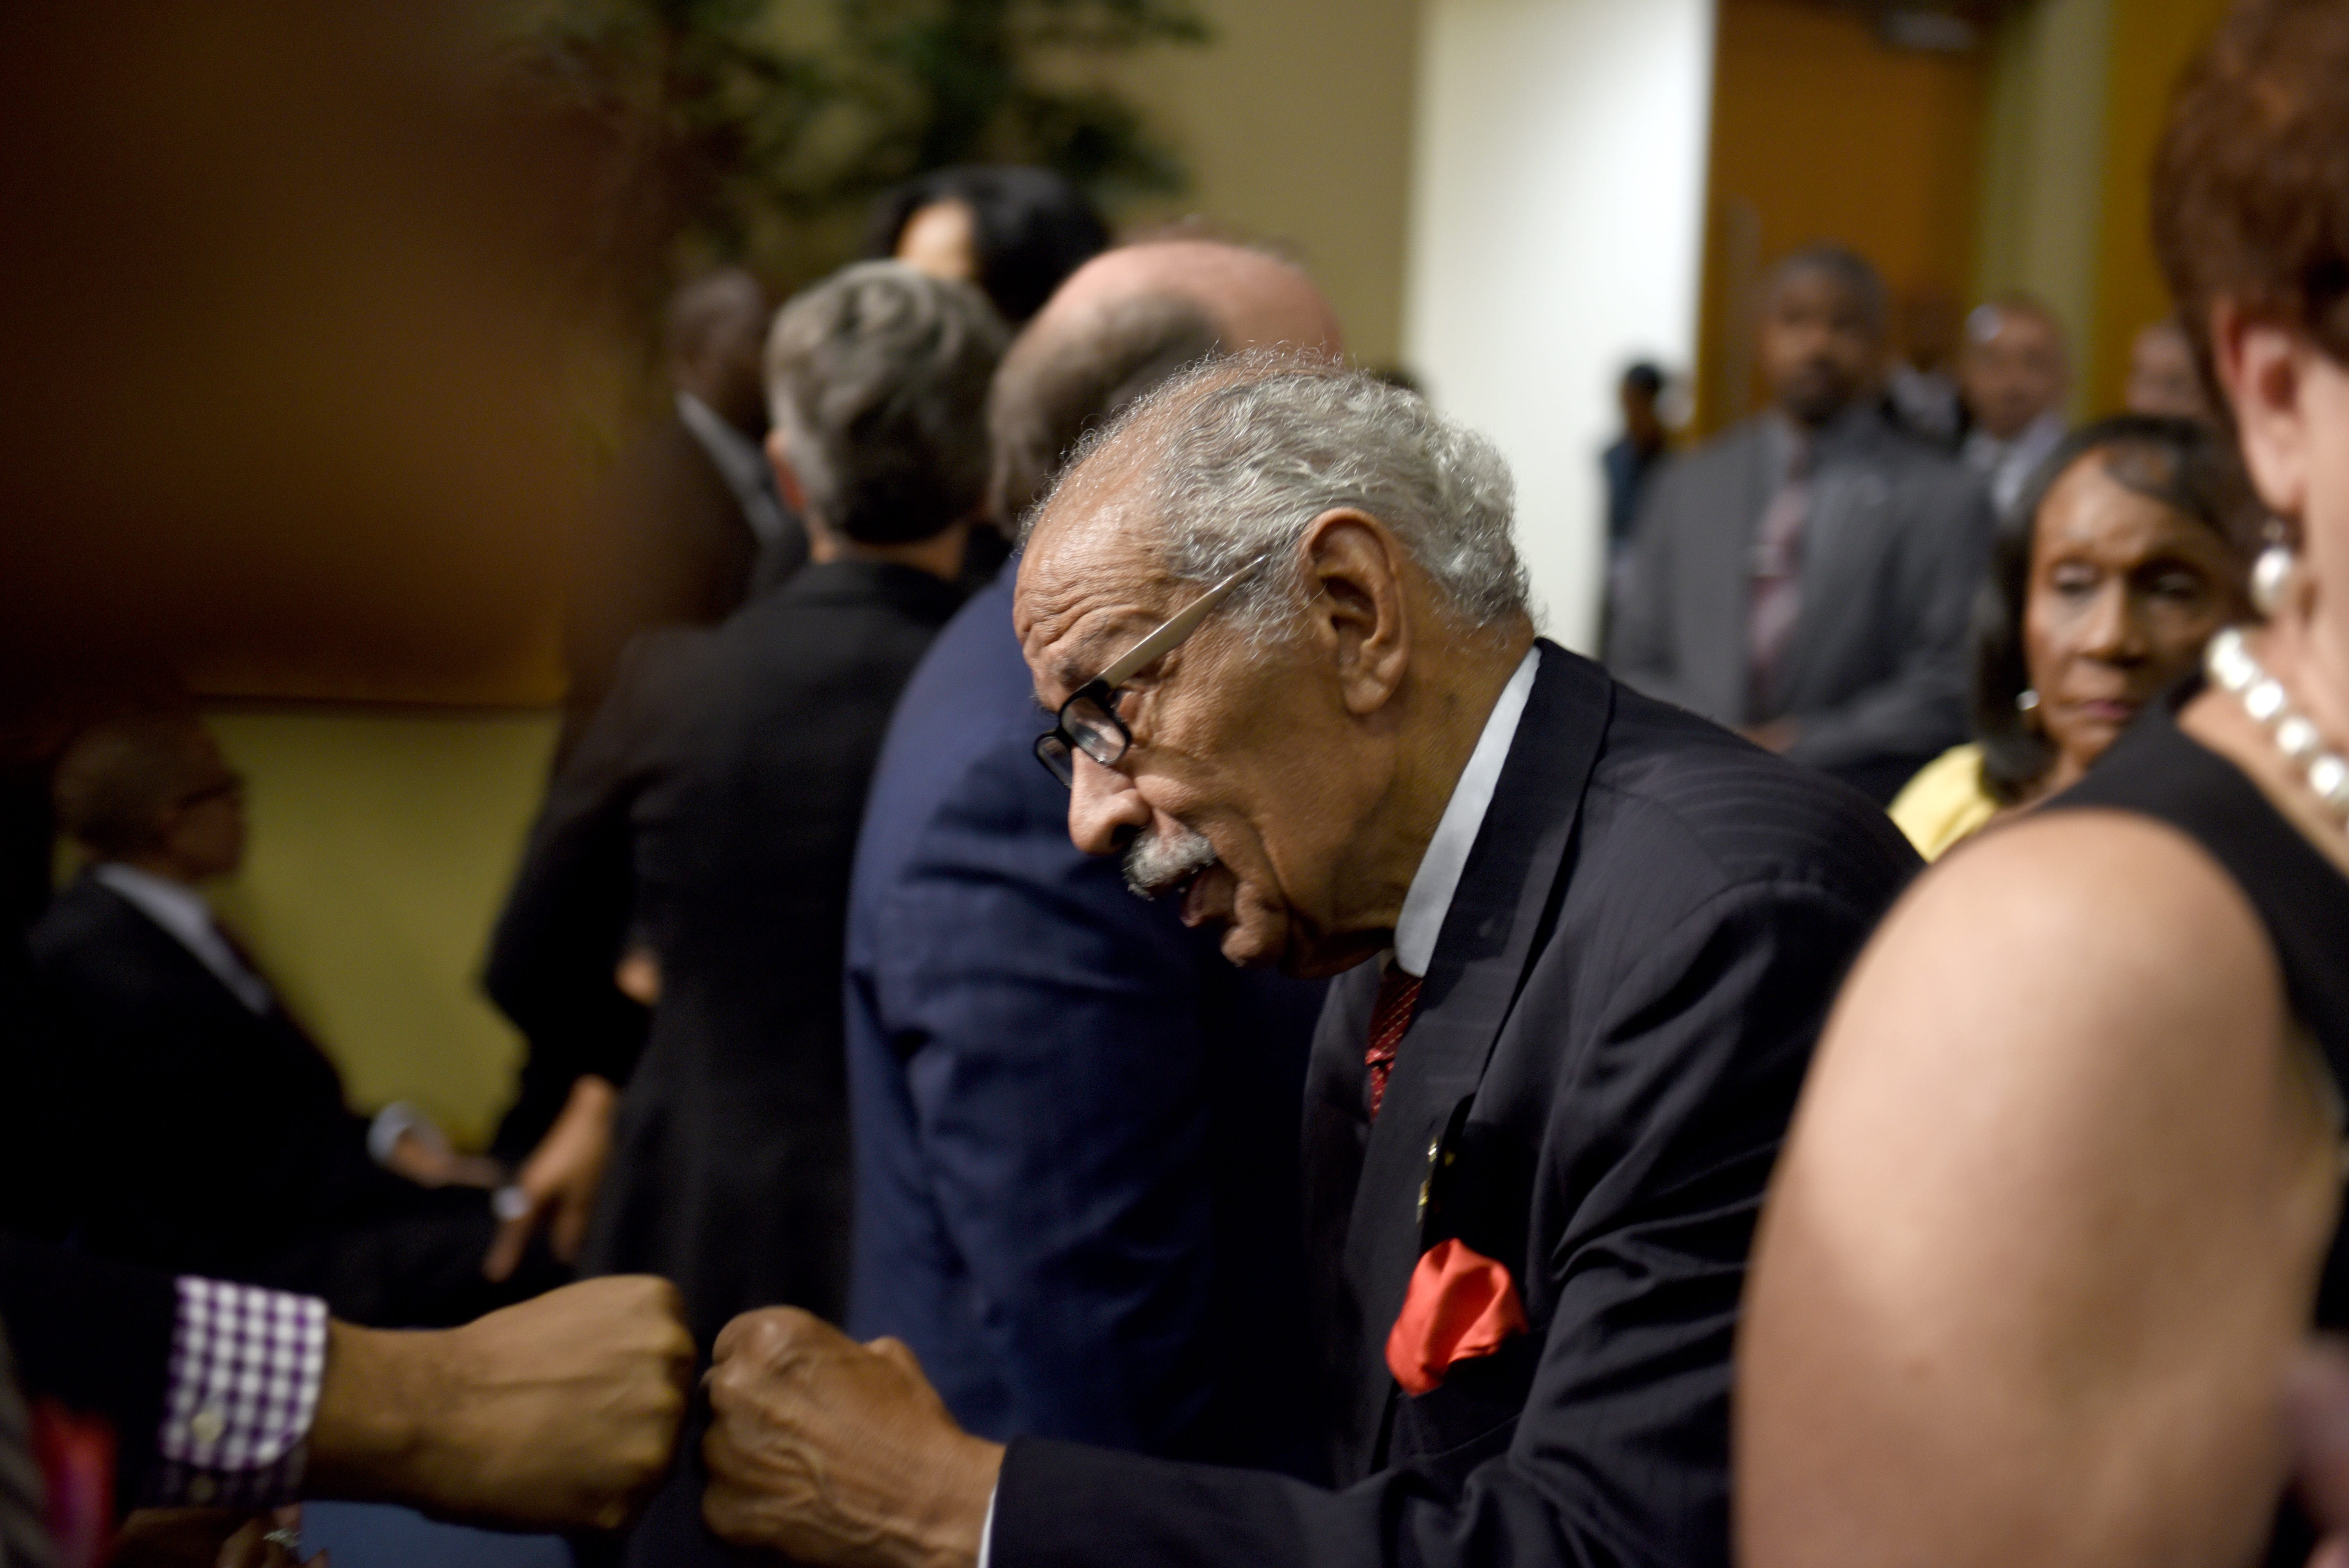 Former U.S. Congressman John Conyers gets a fist bump at the Aretha Franklin memorial at Greater Grace Temple.